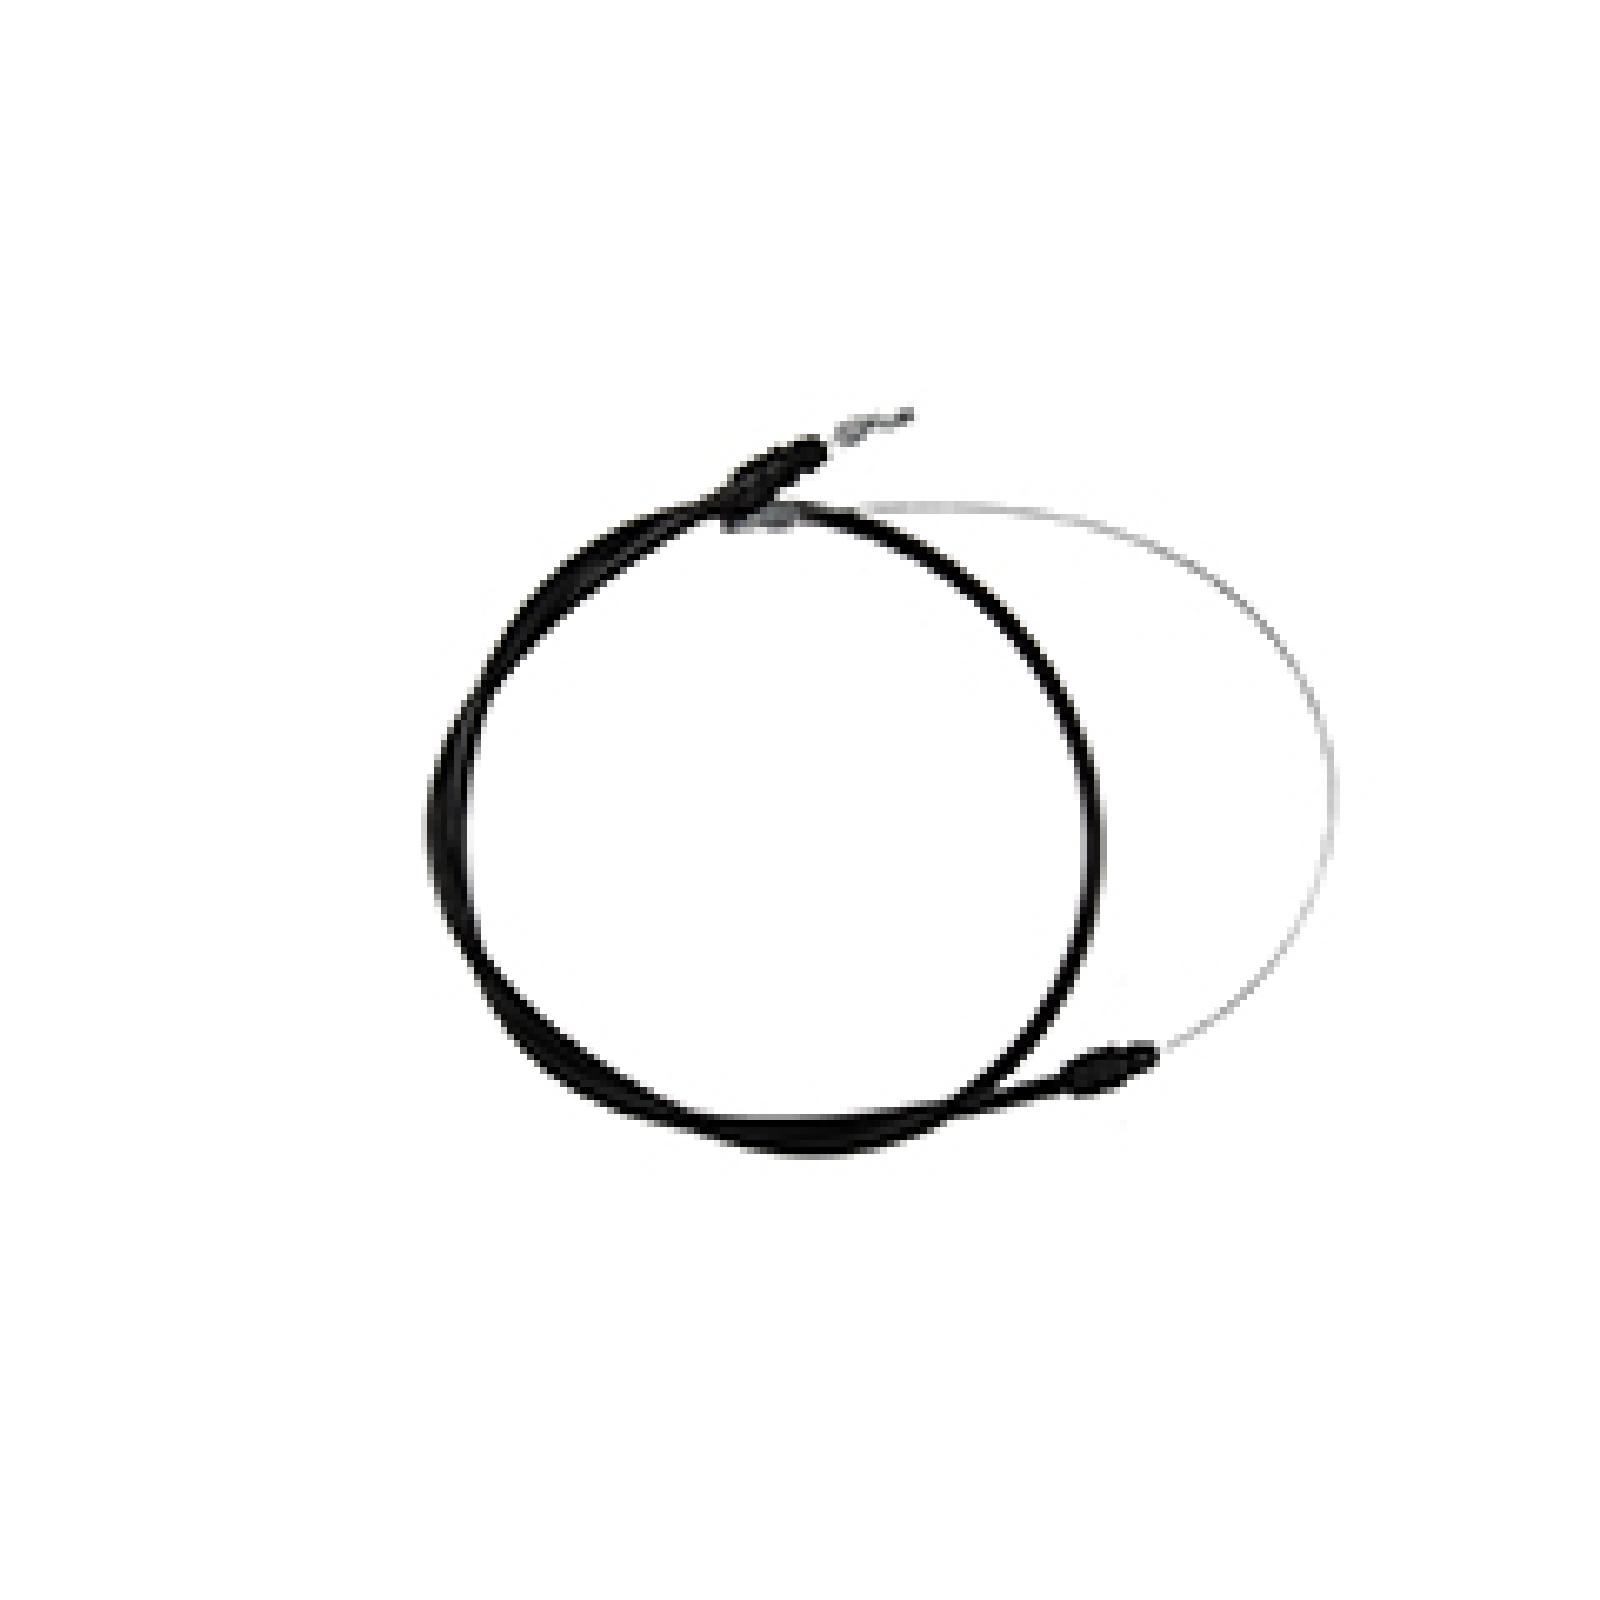 CABLE 37 . 375LG part# 9461113A by MTD